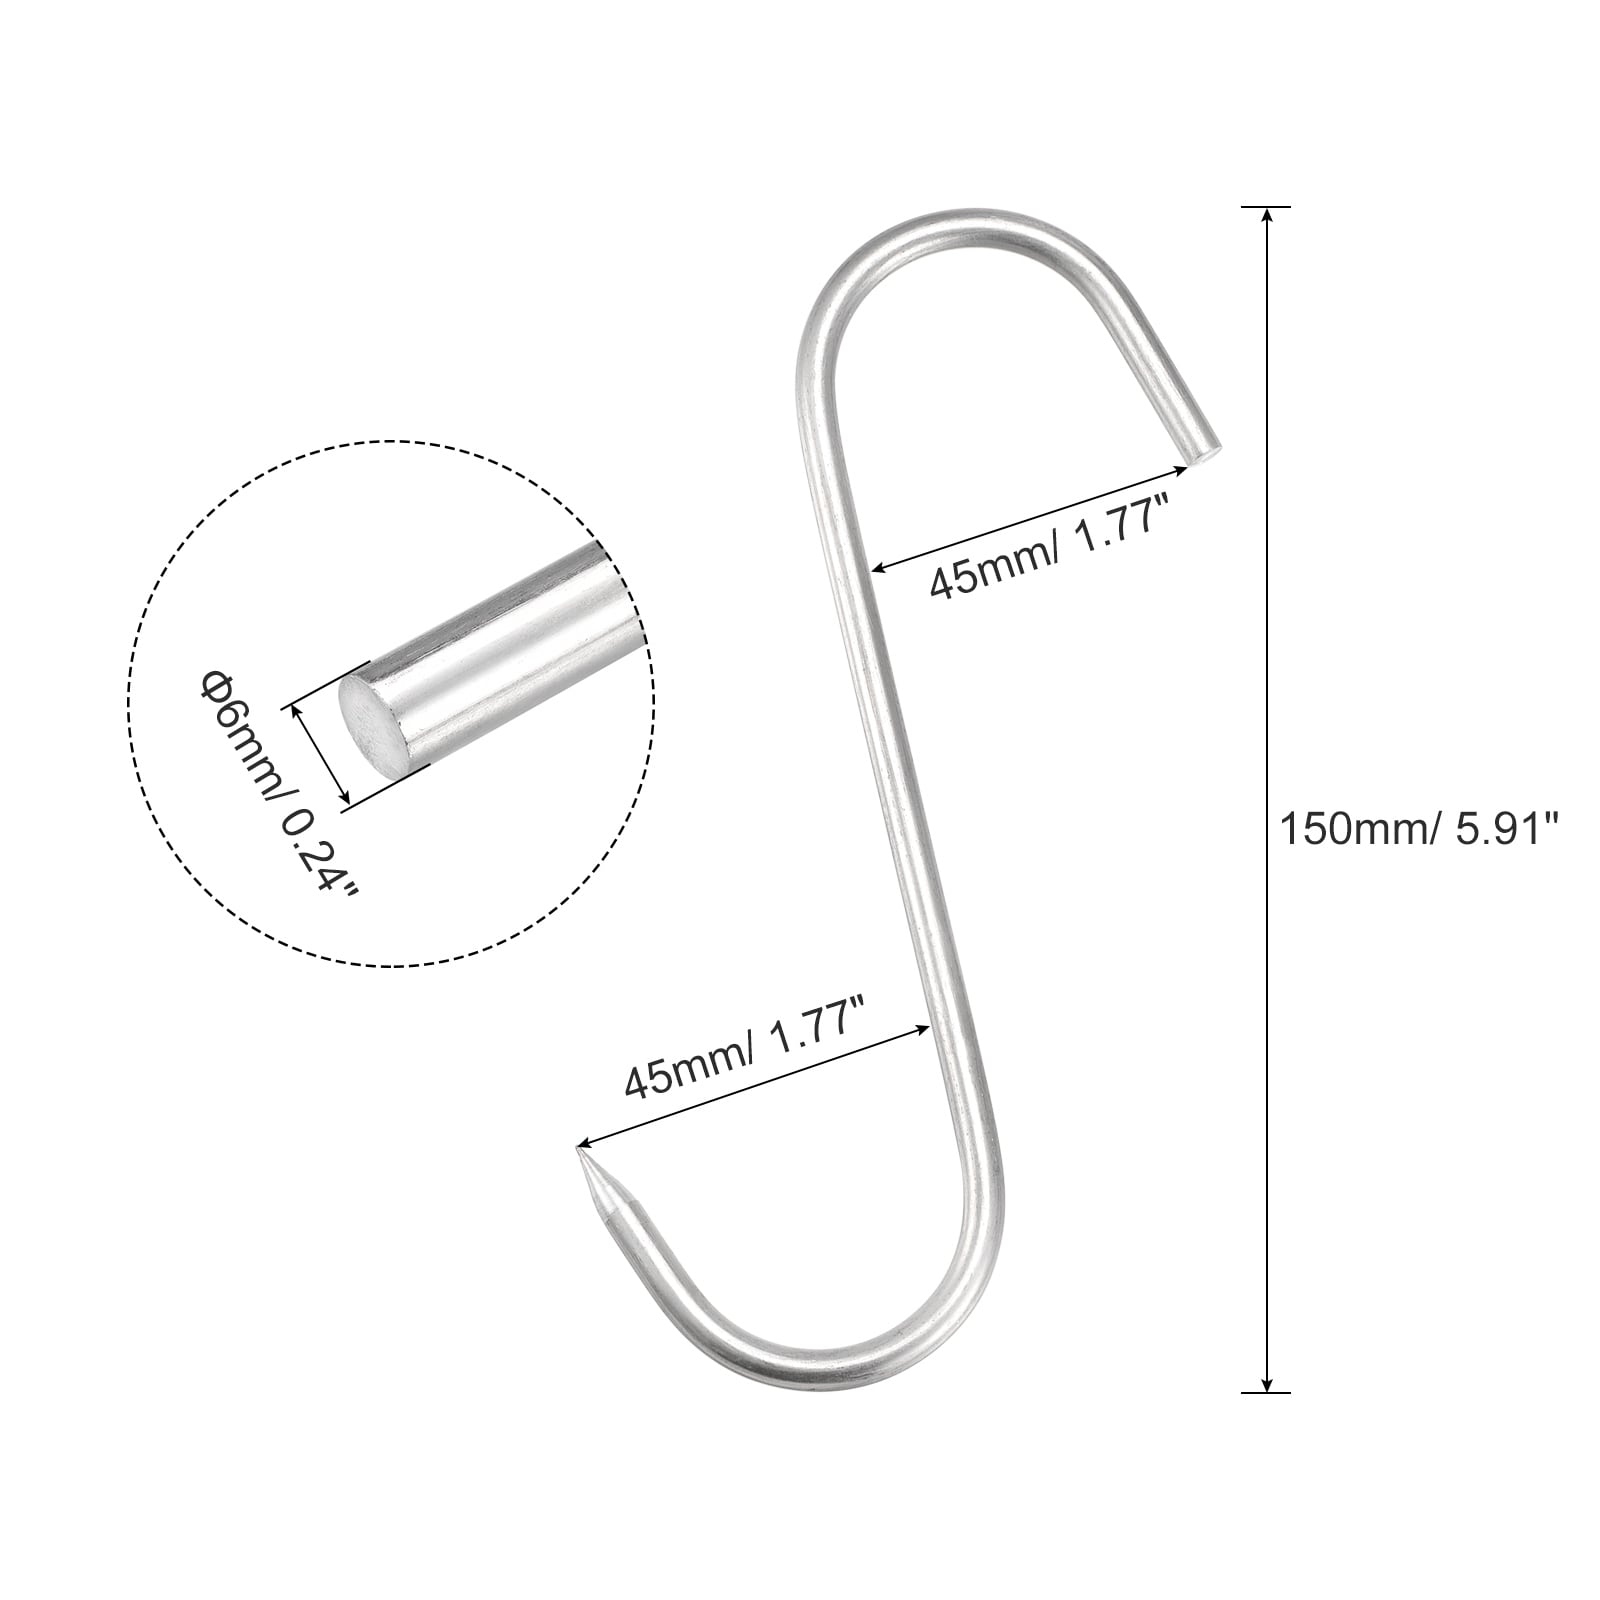 5.91 Meat Hooks, 0.24 Thick Stainless Steel S-Hook Meat Processing 1Pcs -  Silver Tone - Bed Bath & Beyond - 35929143